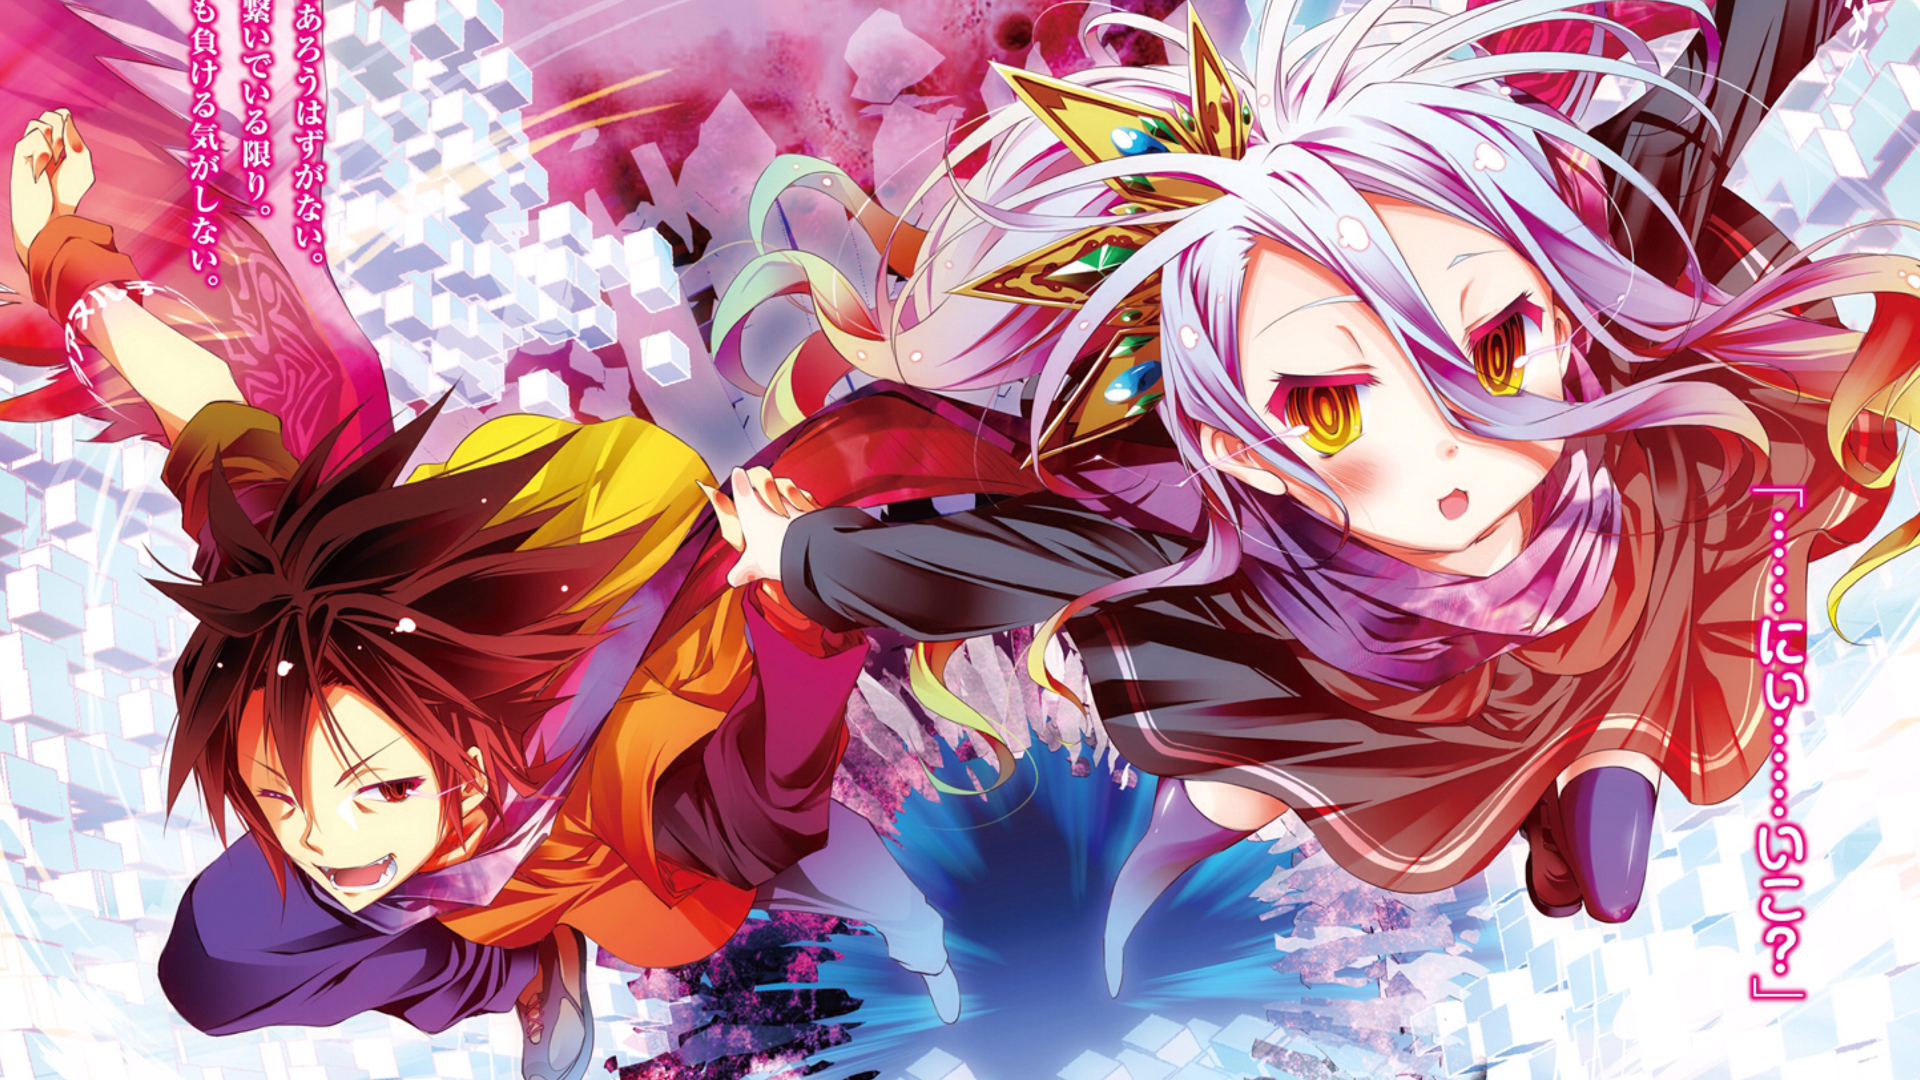 680+ No Game No Life HD Wallpapers and Backgrounds